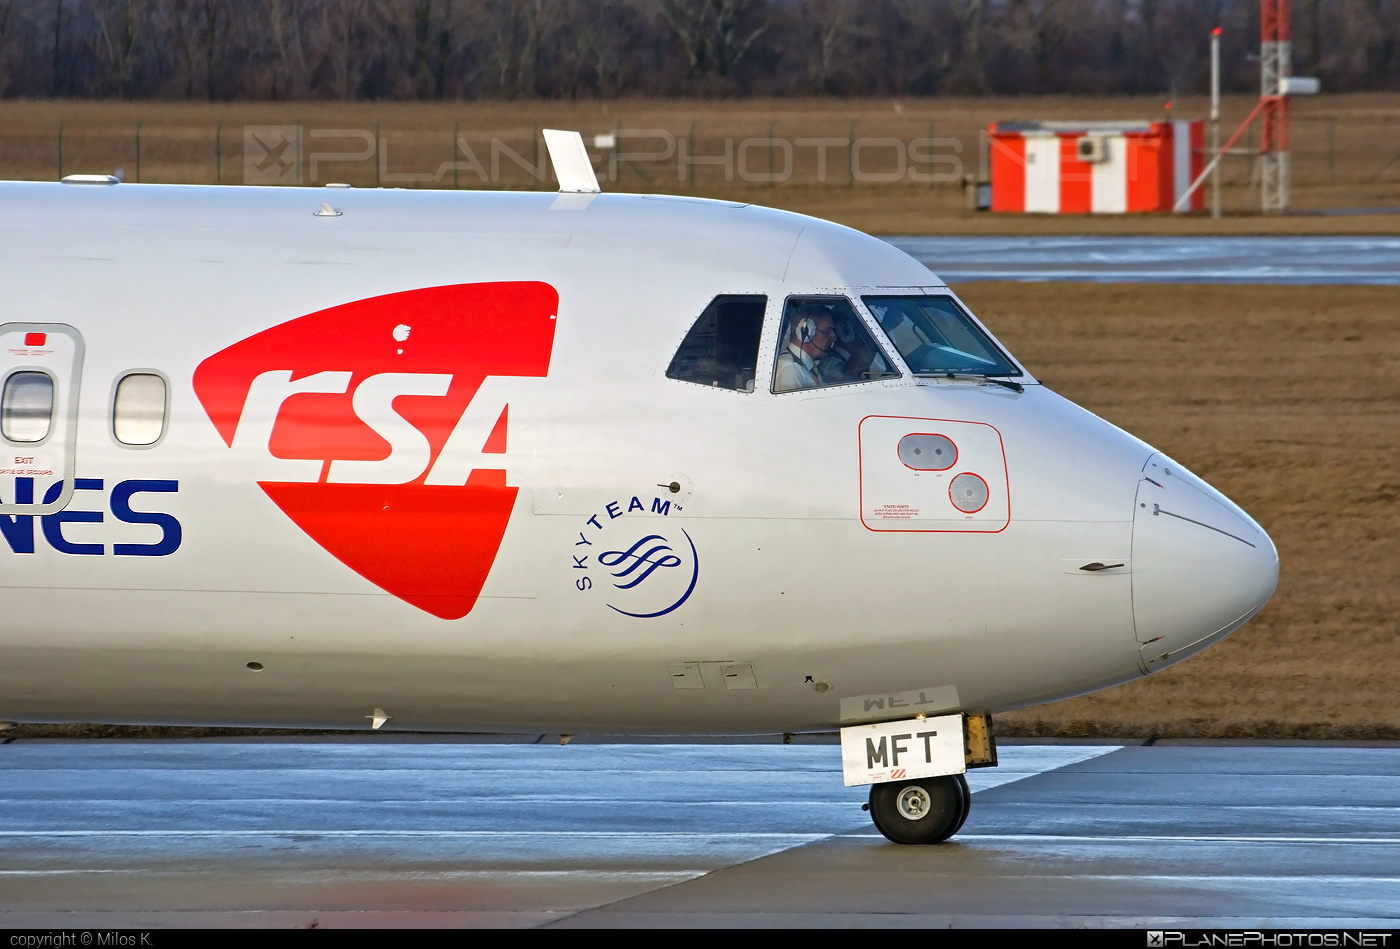 ATR 72-212A - OK-MFT operated by CSA Czech Airlines #atr #atr72 #atr72212a #atr72500 #csa #czechairlines